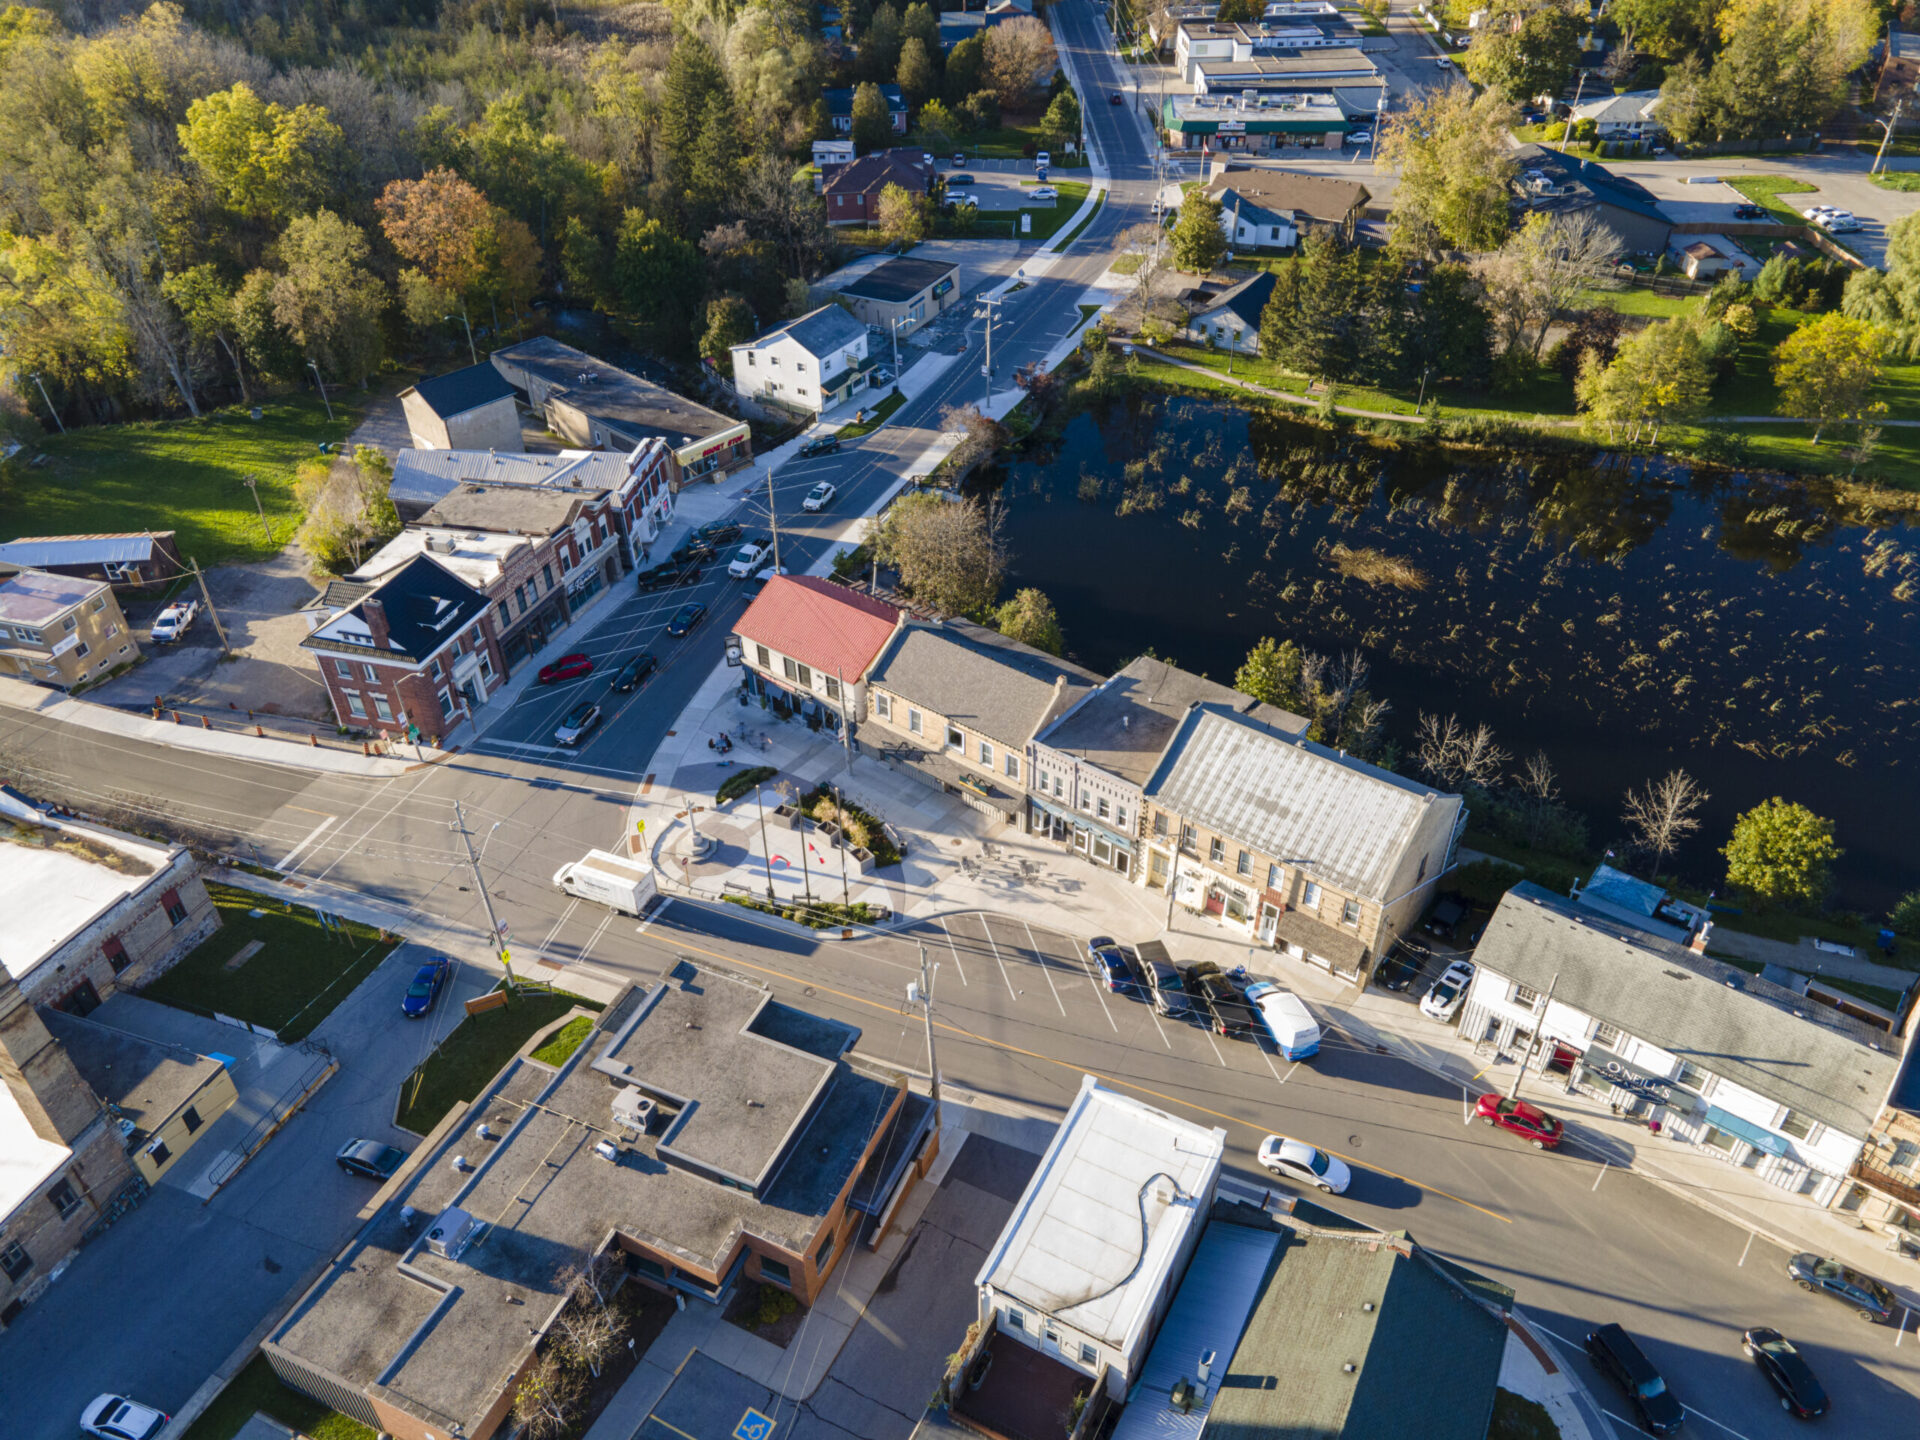 An aerial view highlighting the architecture and design of a small town.